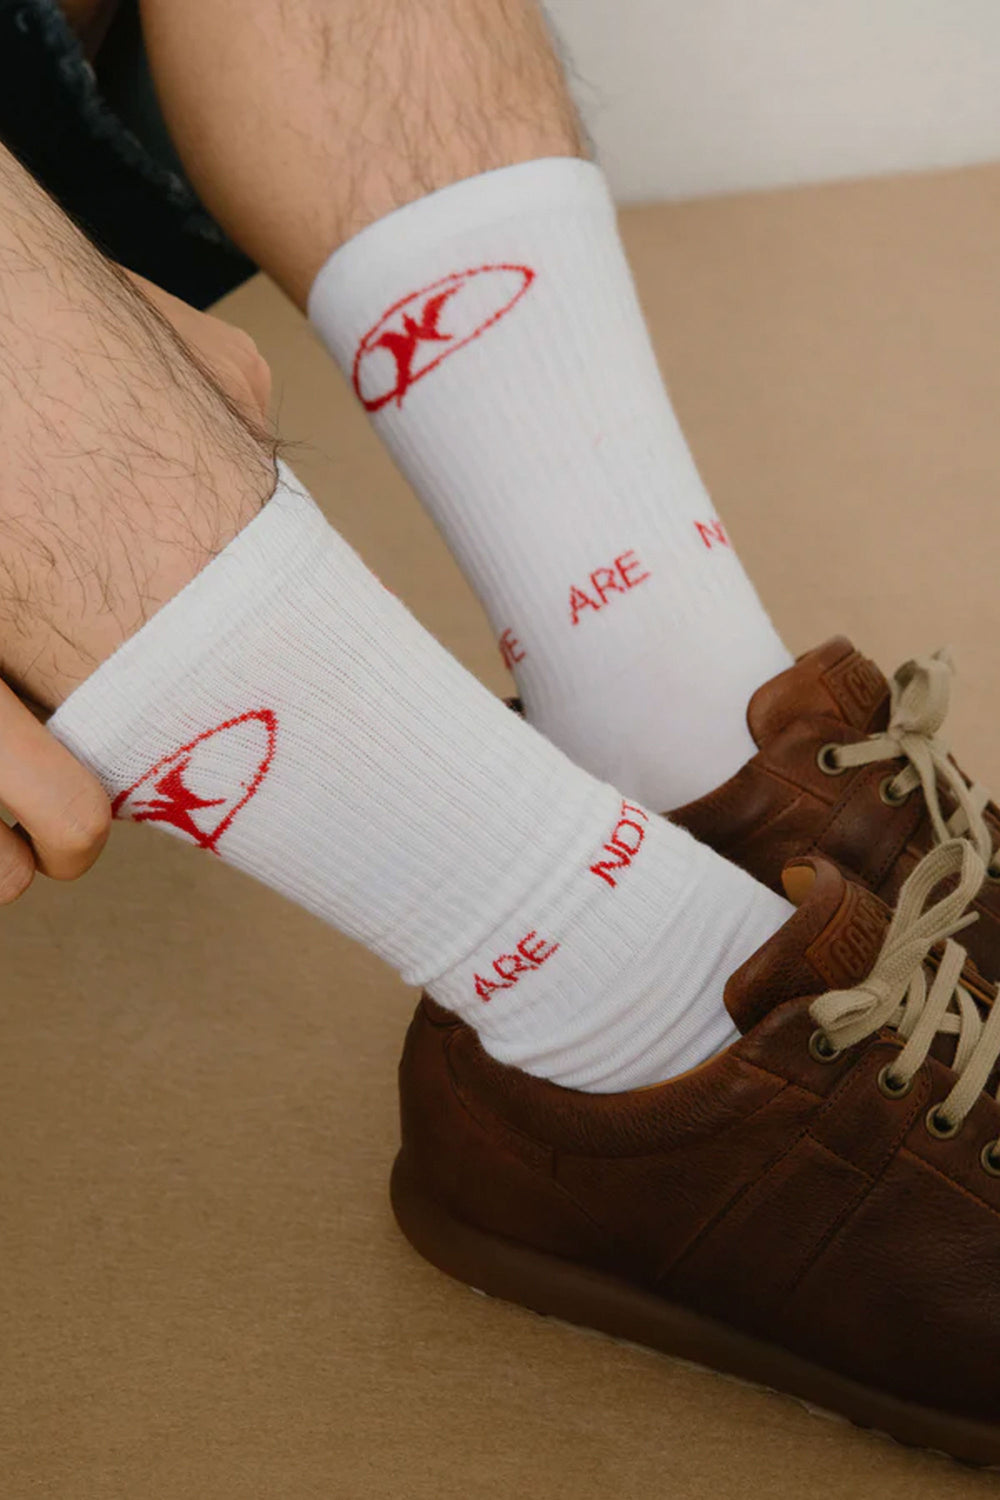 PUKAS-SURF-SHOP-SOCKS-WE-ARE-NOT-FRIENDS-OVAL-W